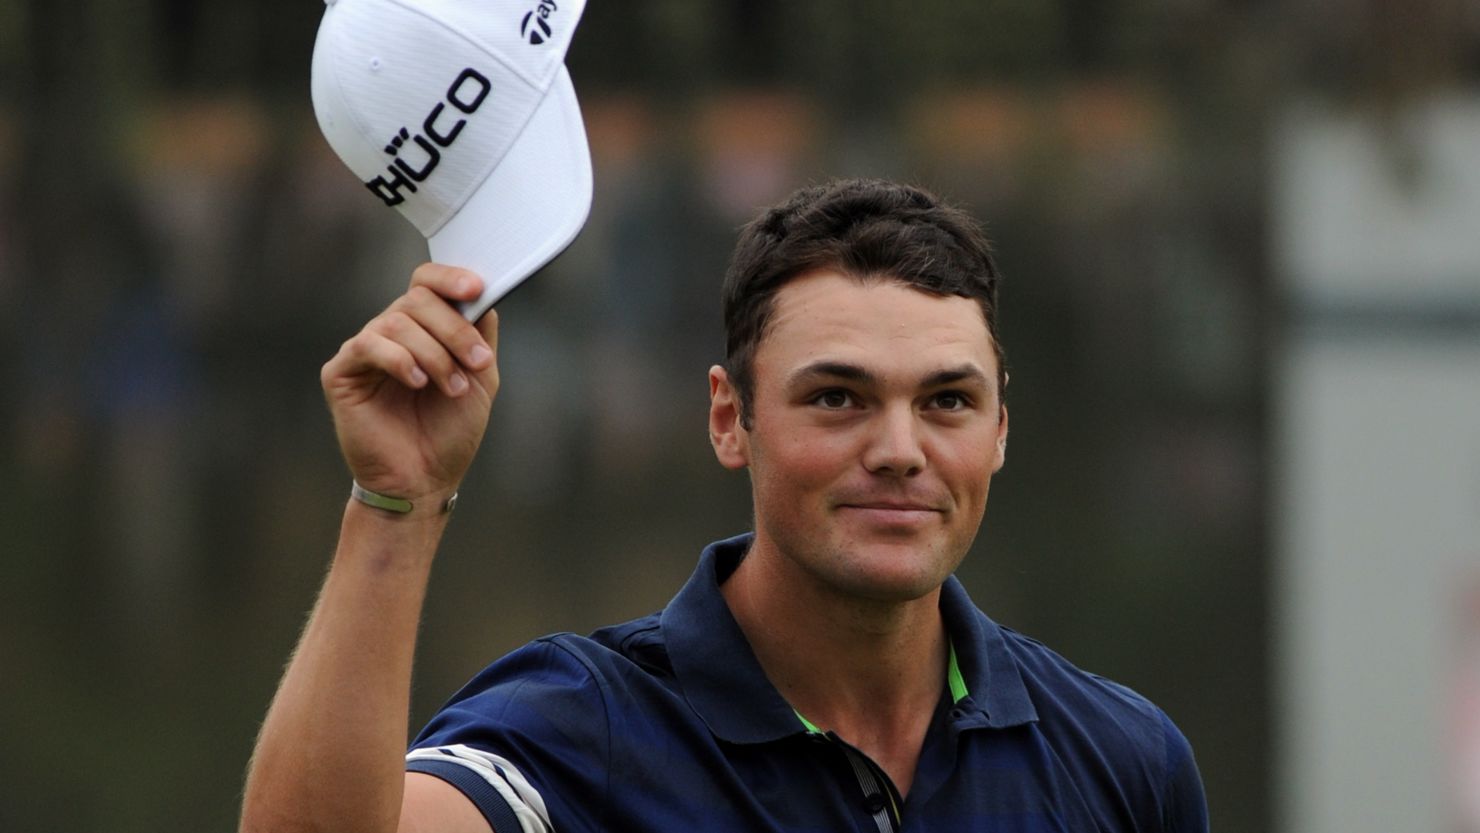 A sensational final round 63 gave Kaymer a three-stroke victory in Shanghai.